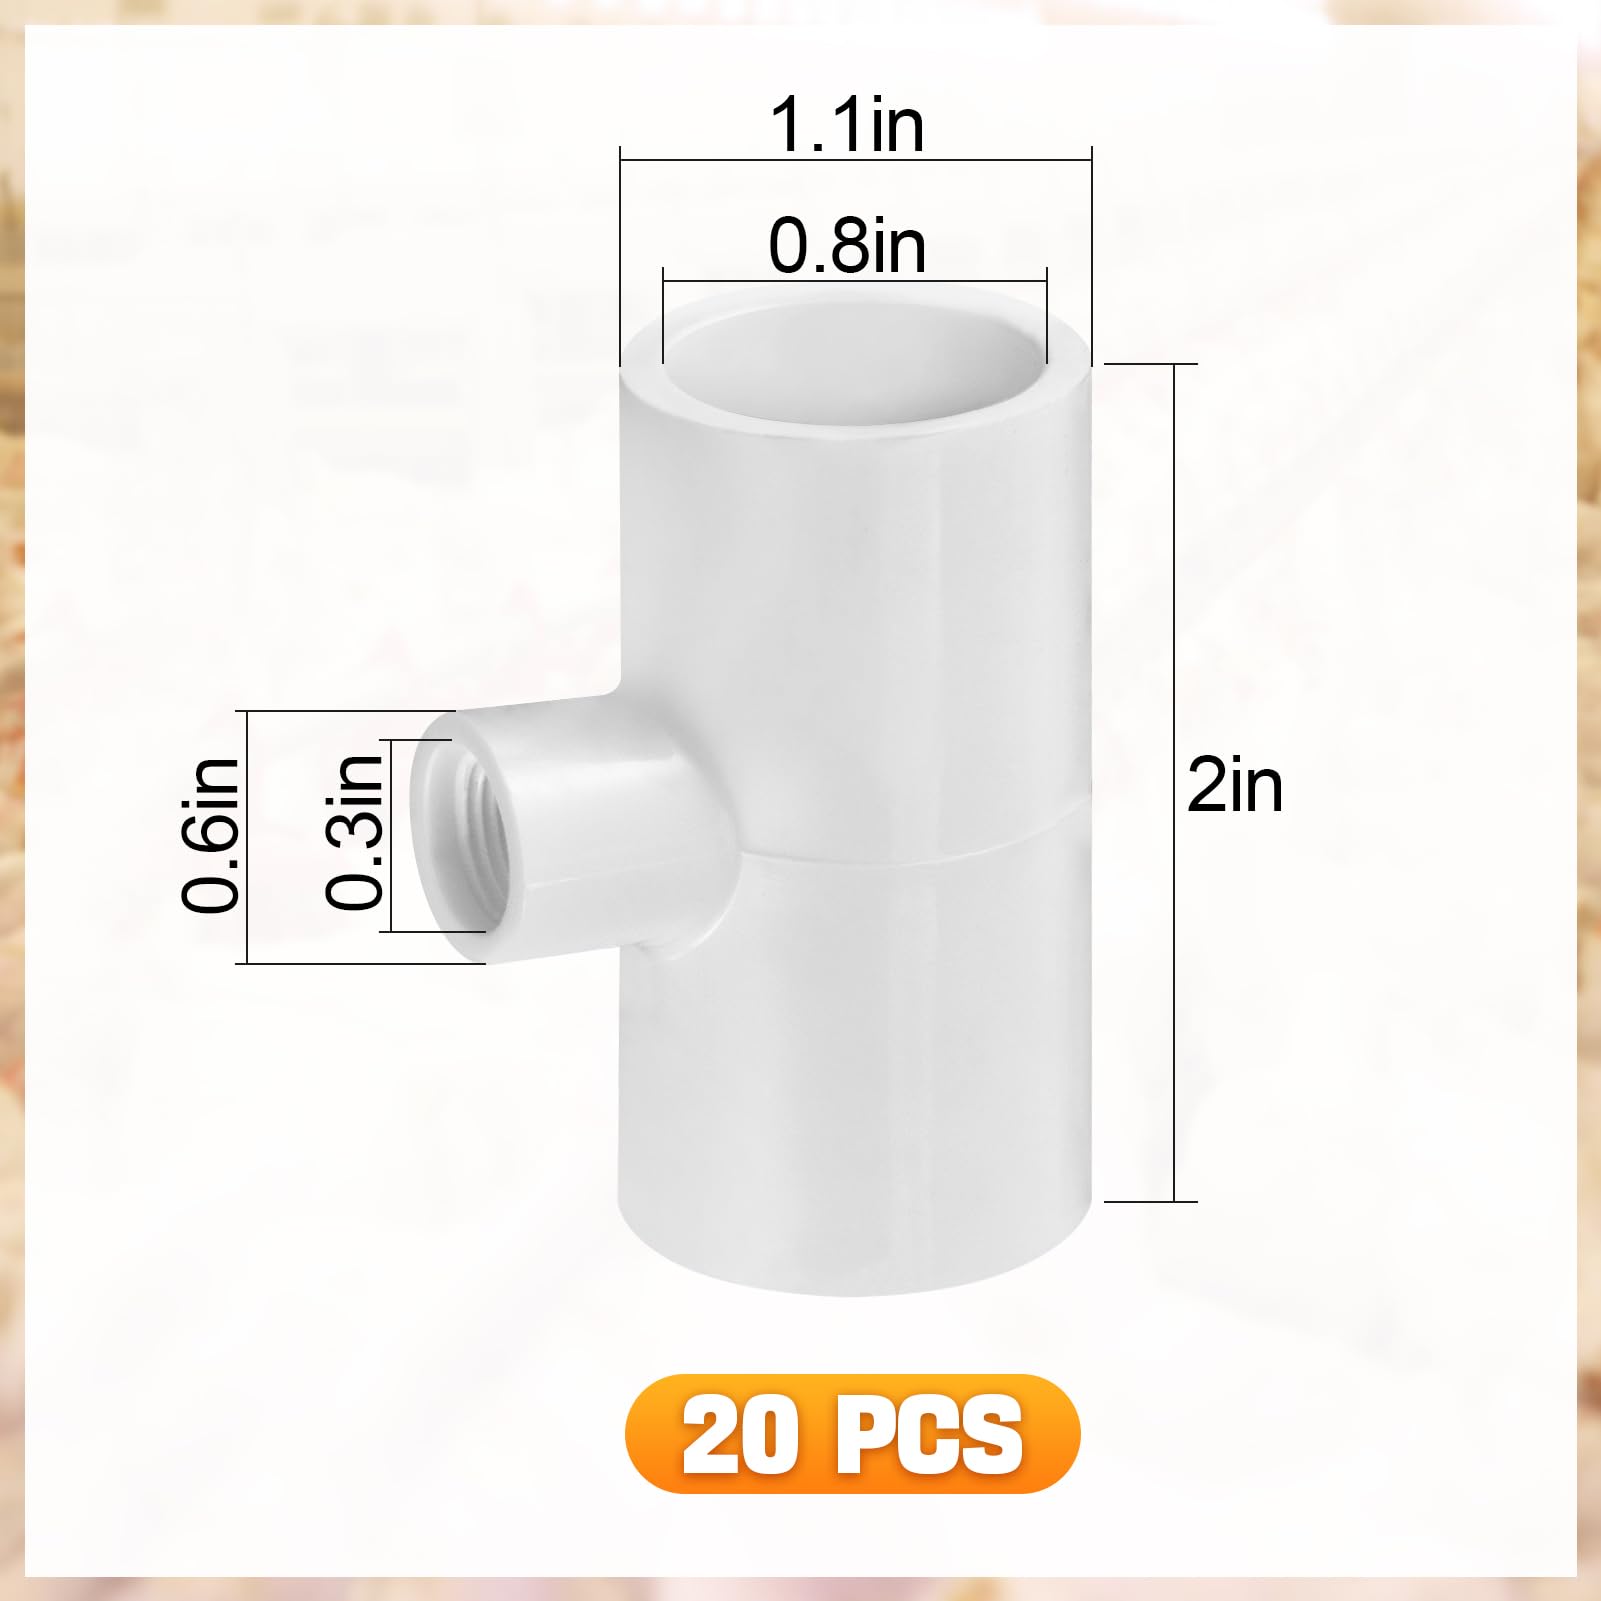 Pack of 20 Chicken Waterer PVC Tee Fittings- Fully Automatic for Threaded Poultry Nipples Chicken Water Drinker and Feeder Cups, White